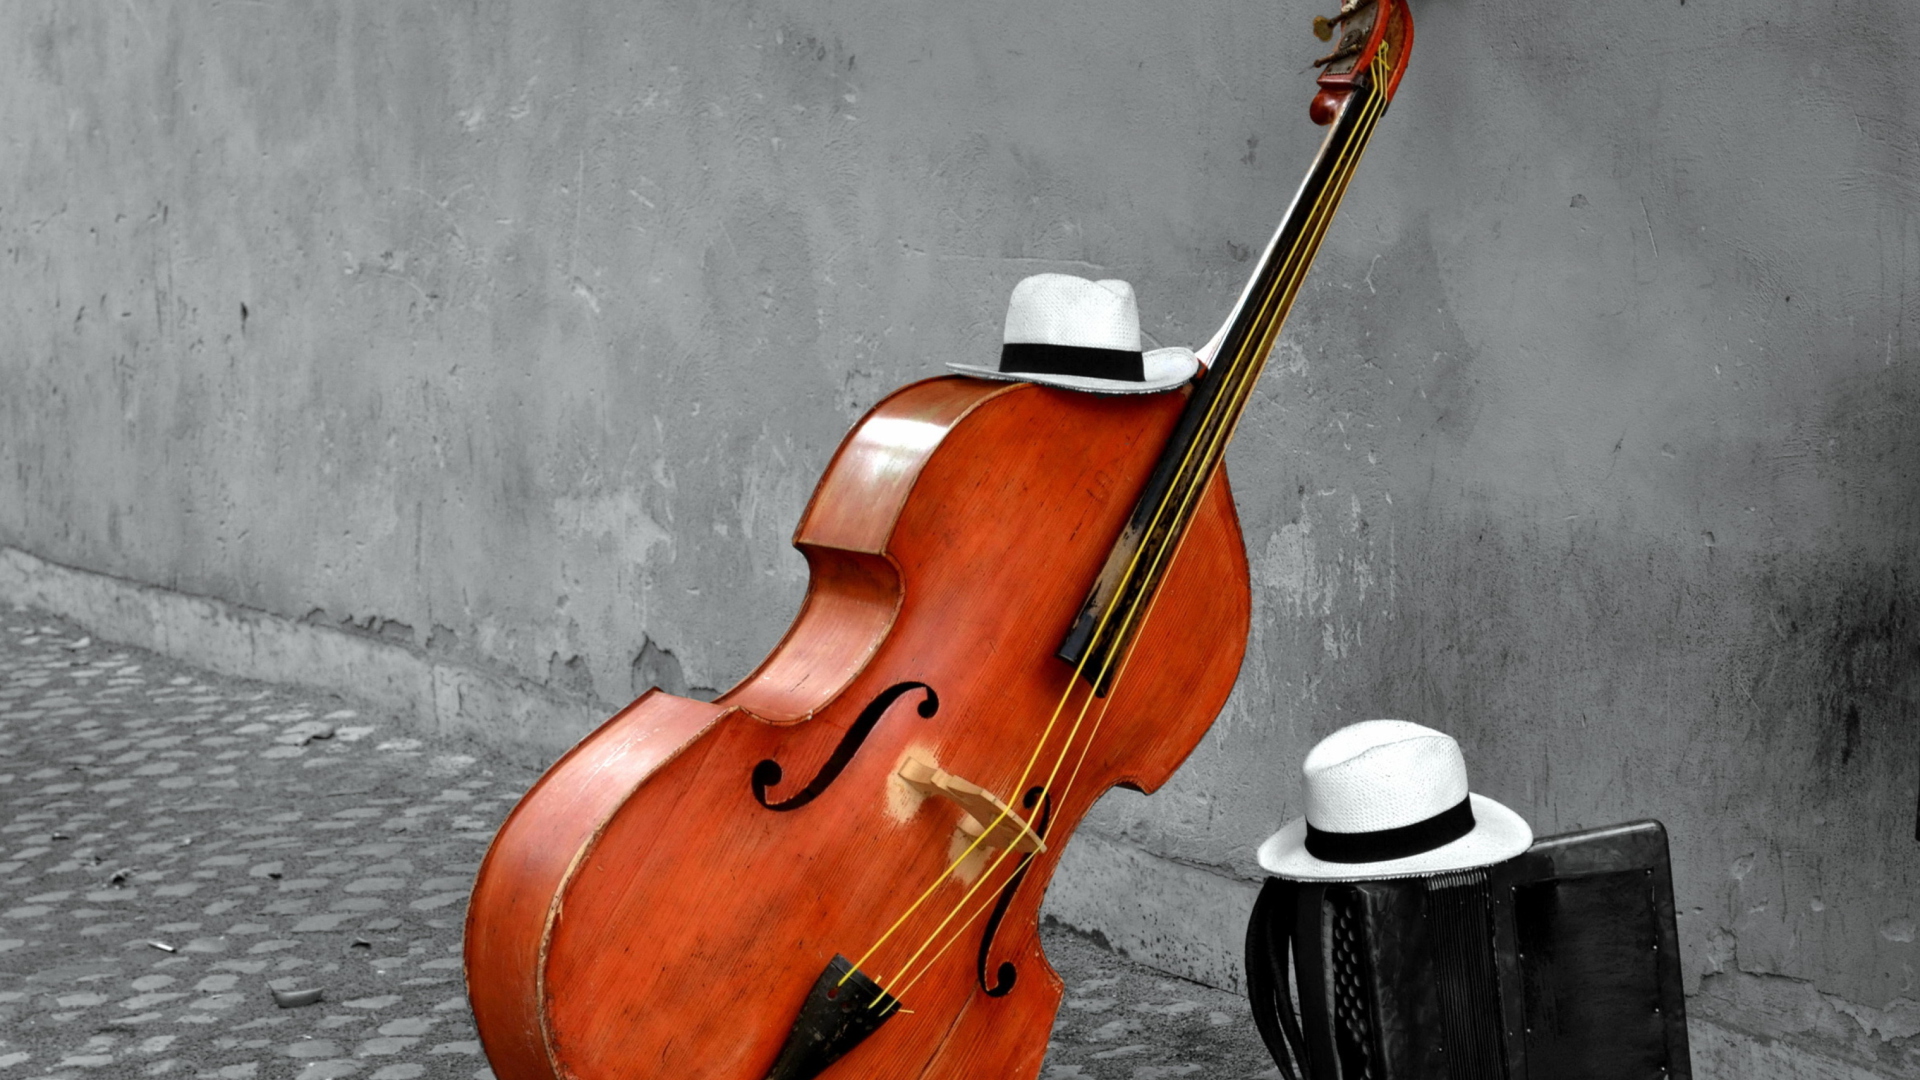 Contrabass And Hat On Street wallpaper 1920x1080